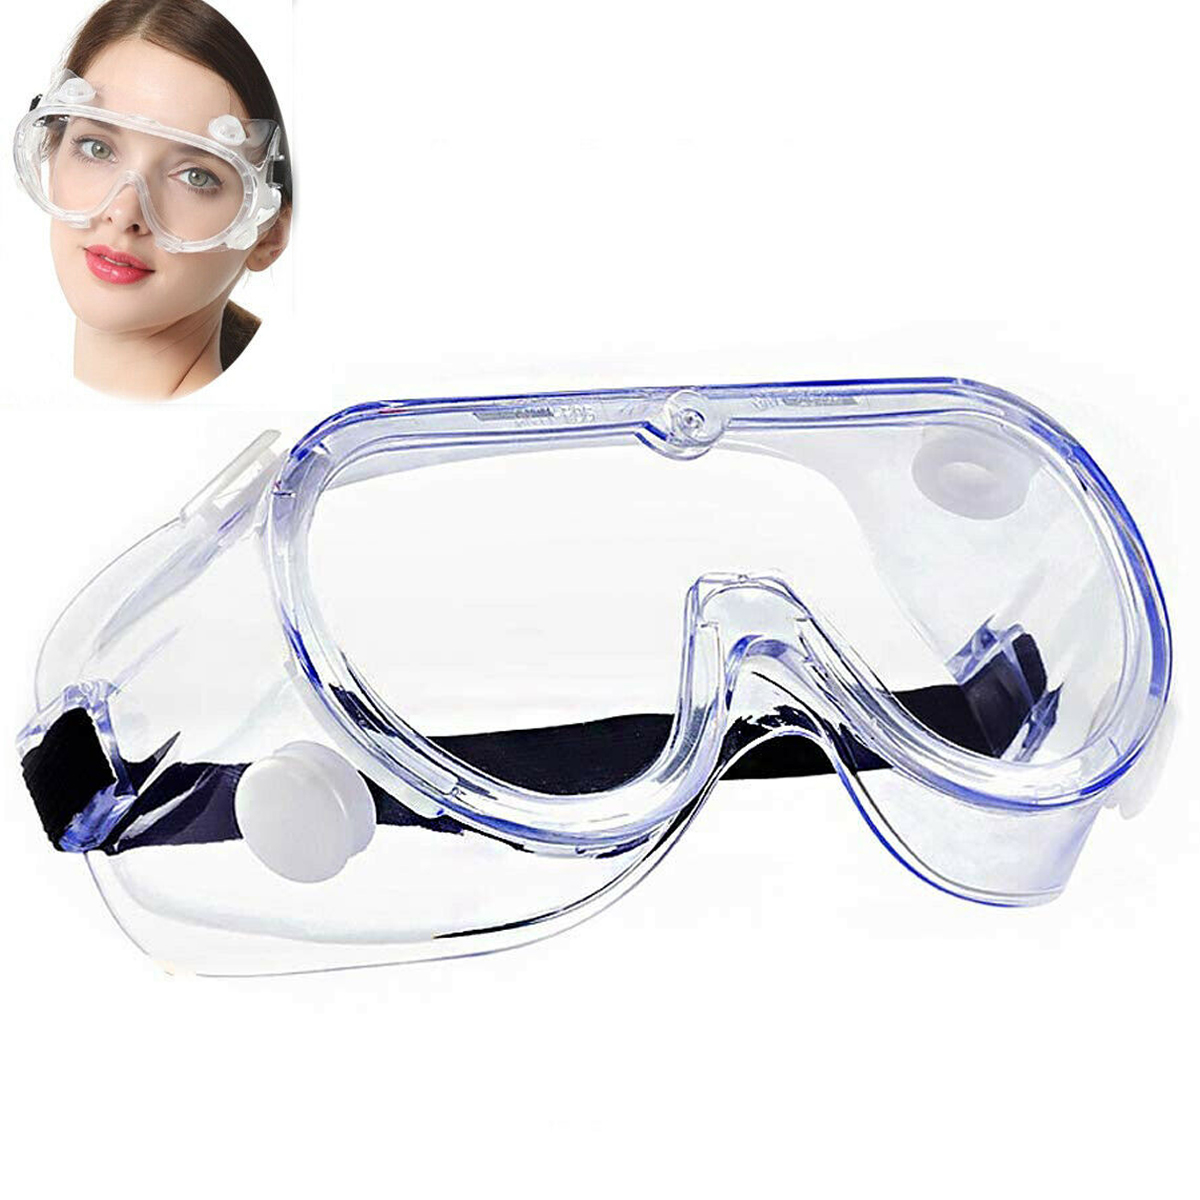 Protective Eyewear Clear Lens Safety Goggles Over Glasses For Lab Work Eye 1pair Ebay